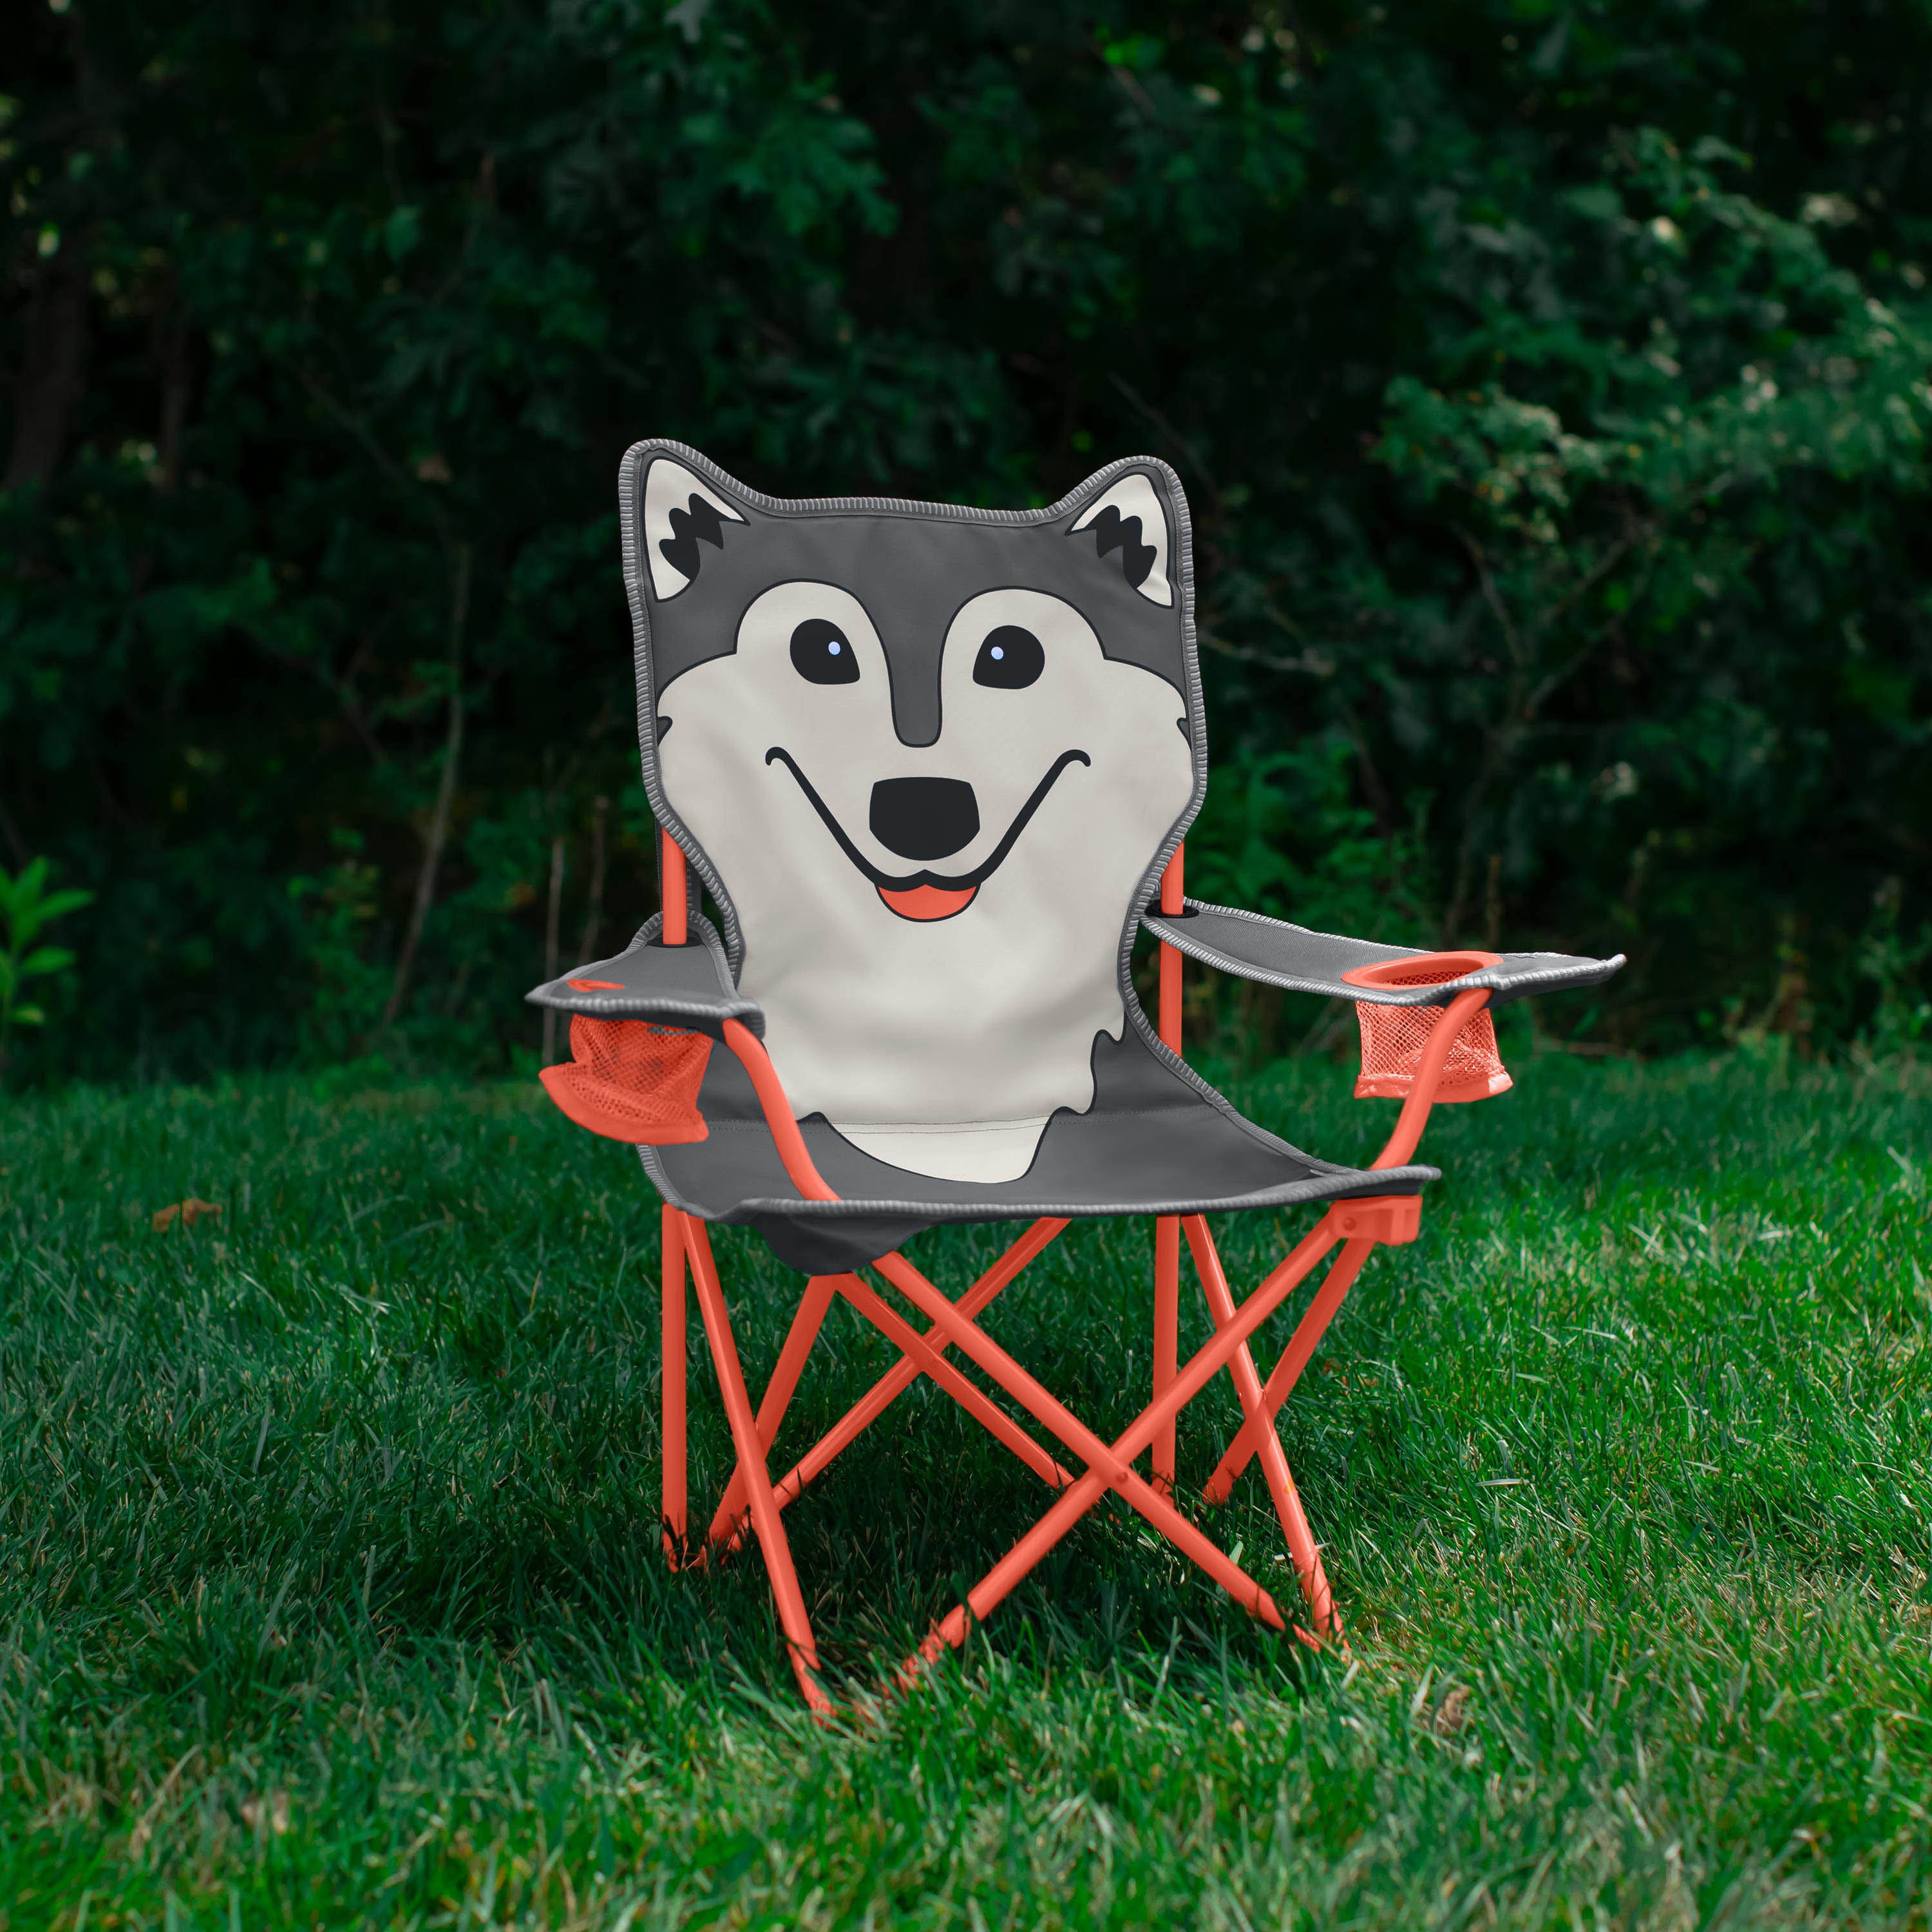 Chair　Kid's　Firefly!　Outdoor　Aspen　Gear　Wolf　the　Camping　Gray/Orange　Color